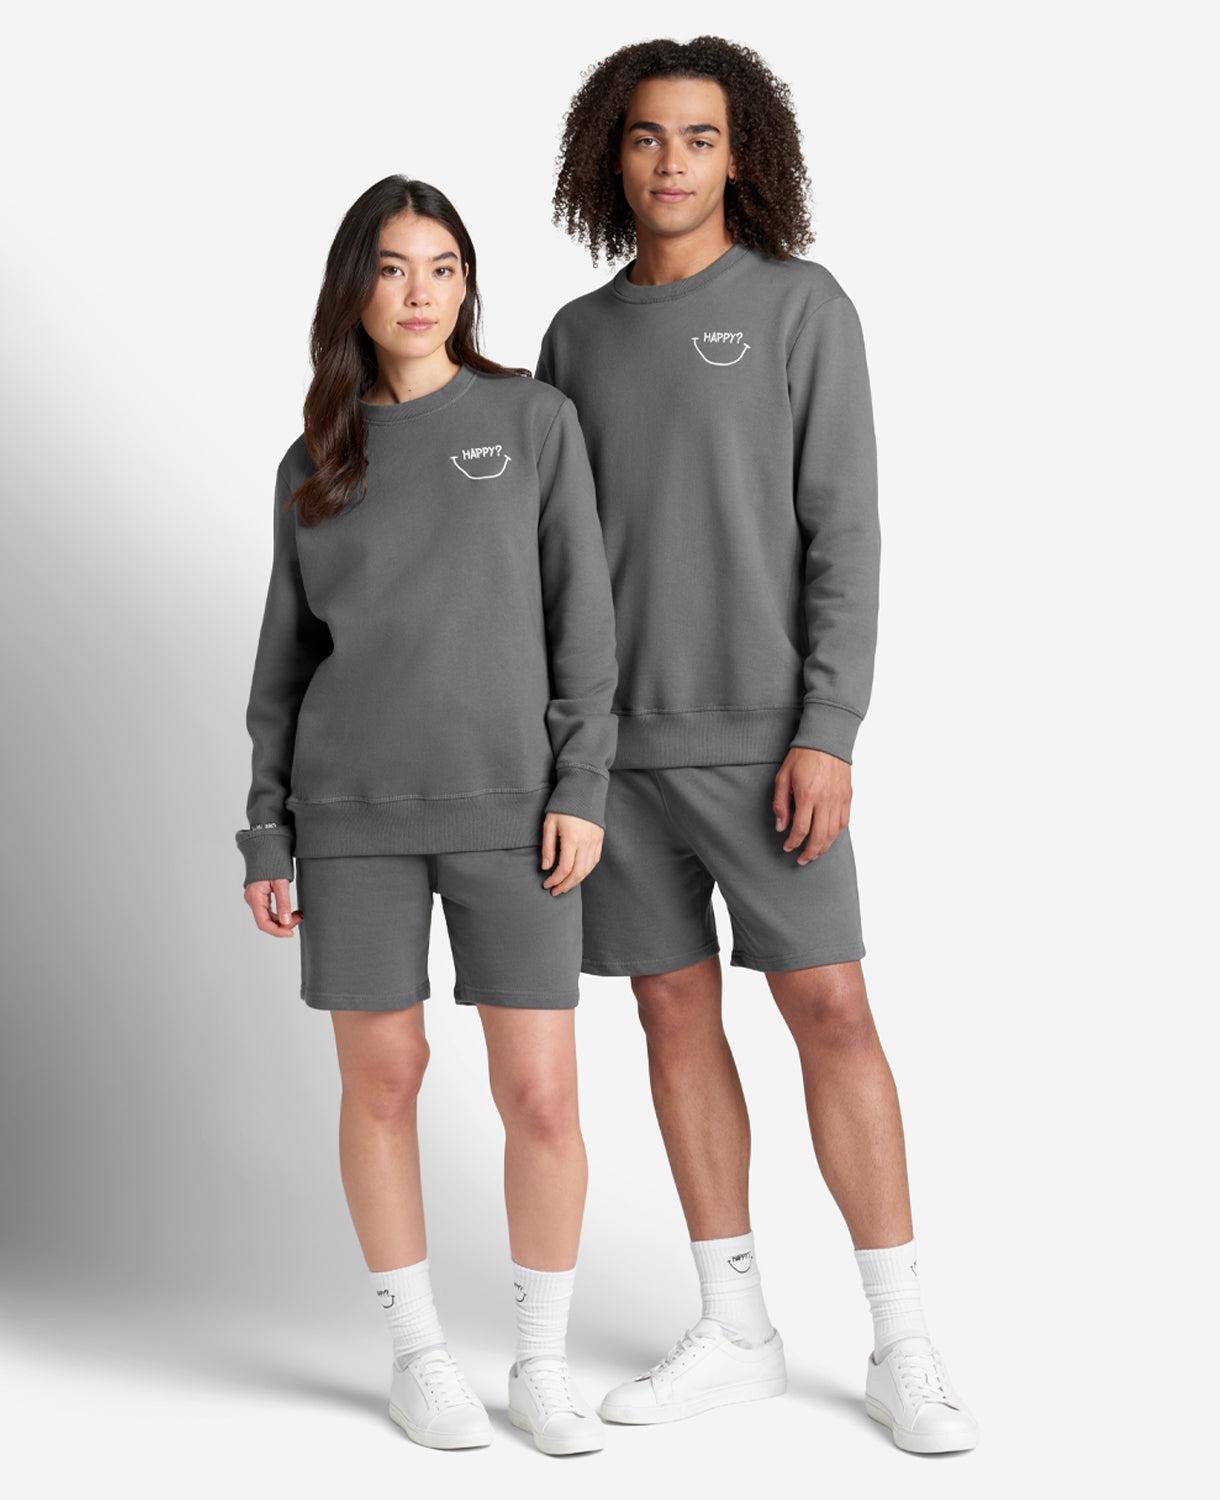 Kenneth Cole | Site Exclusive! Happy Jack - Happy? Crewneck by KENNETH COLE